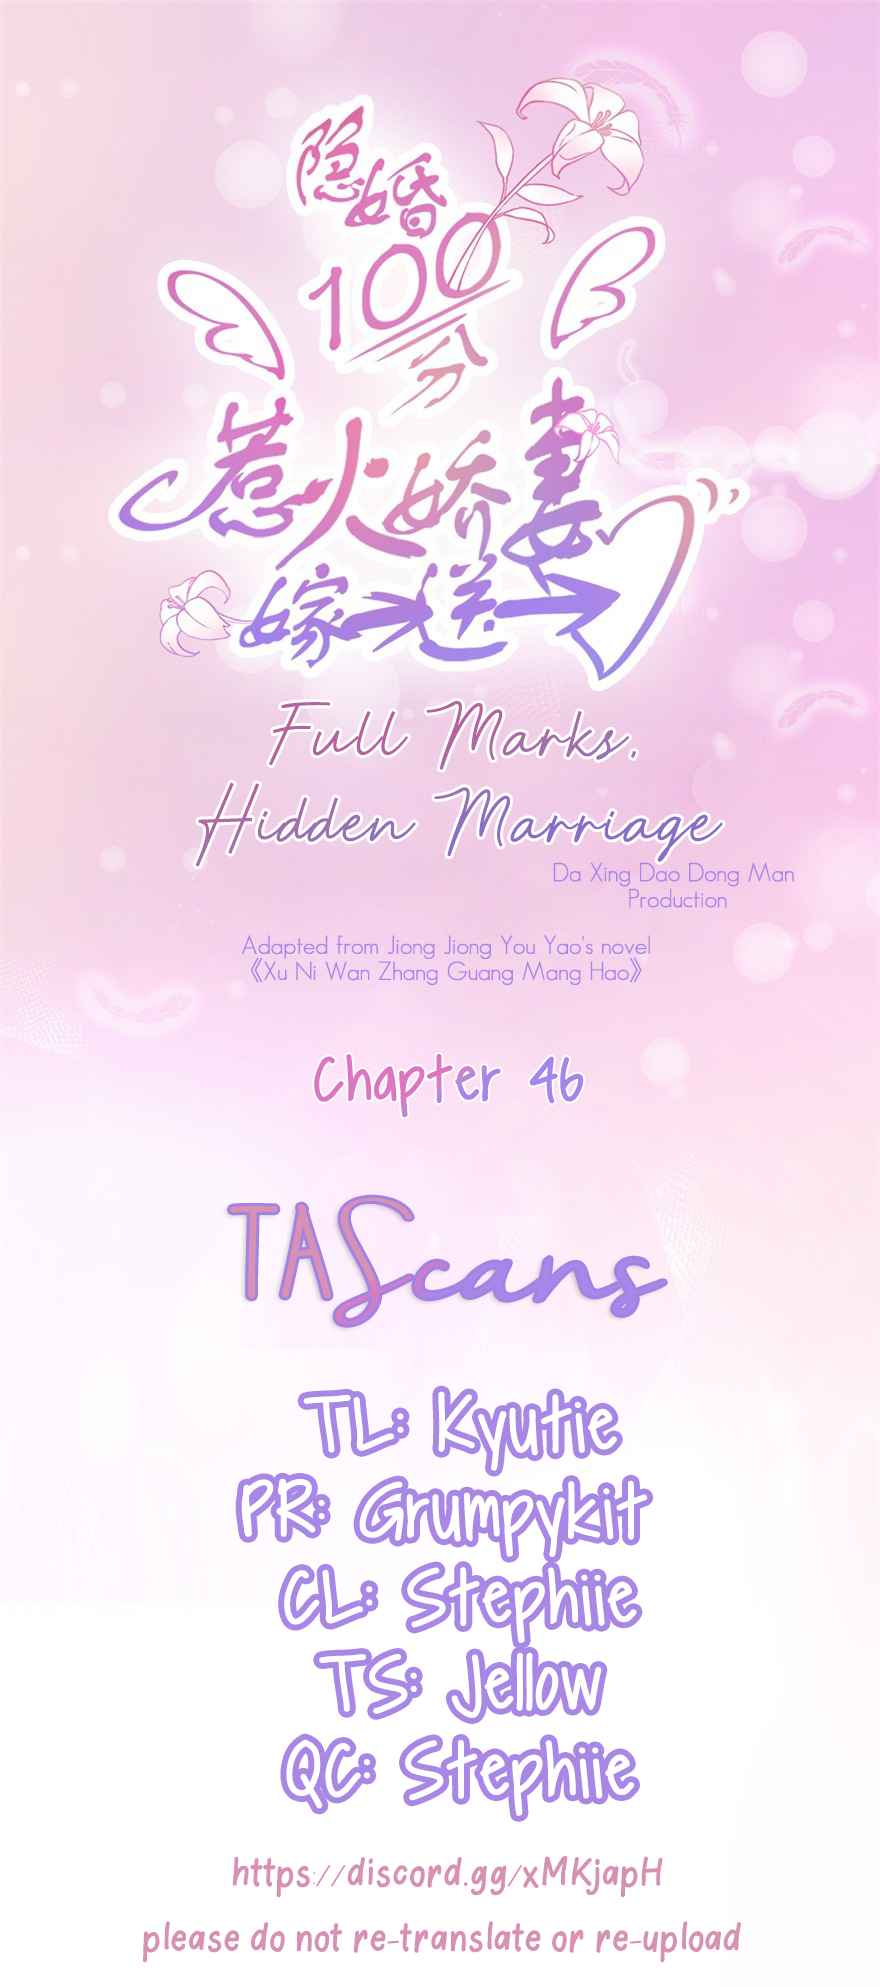 Full Marks, Hidden Marriage Ch. 46 Shopping meets with outrageous